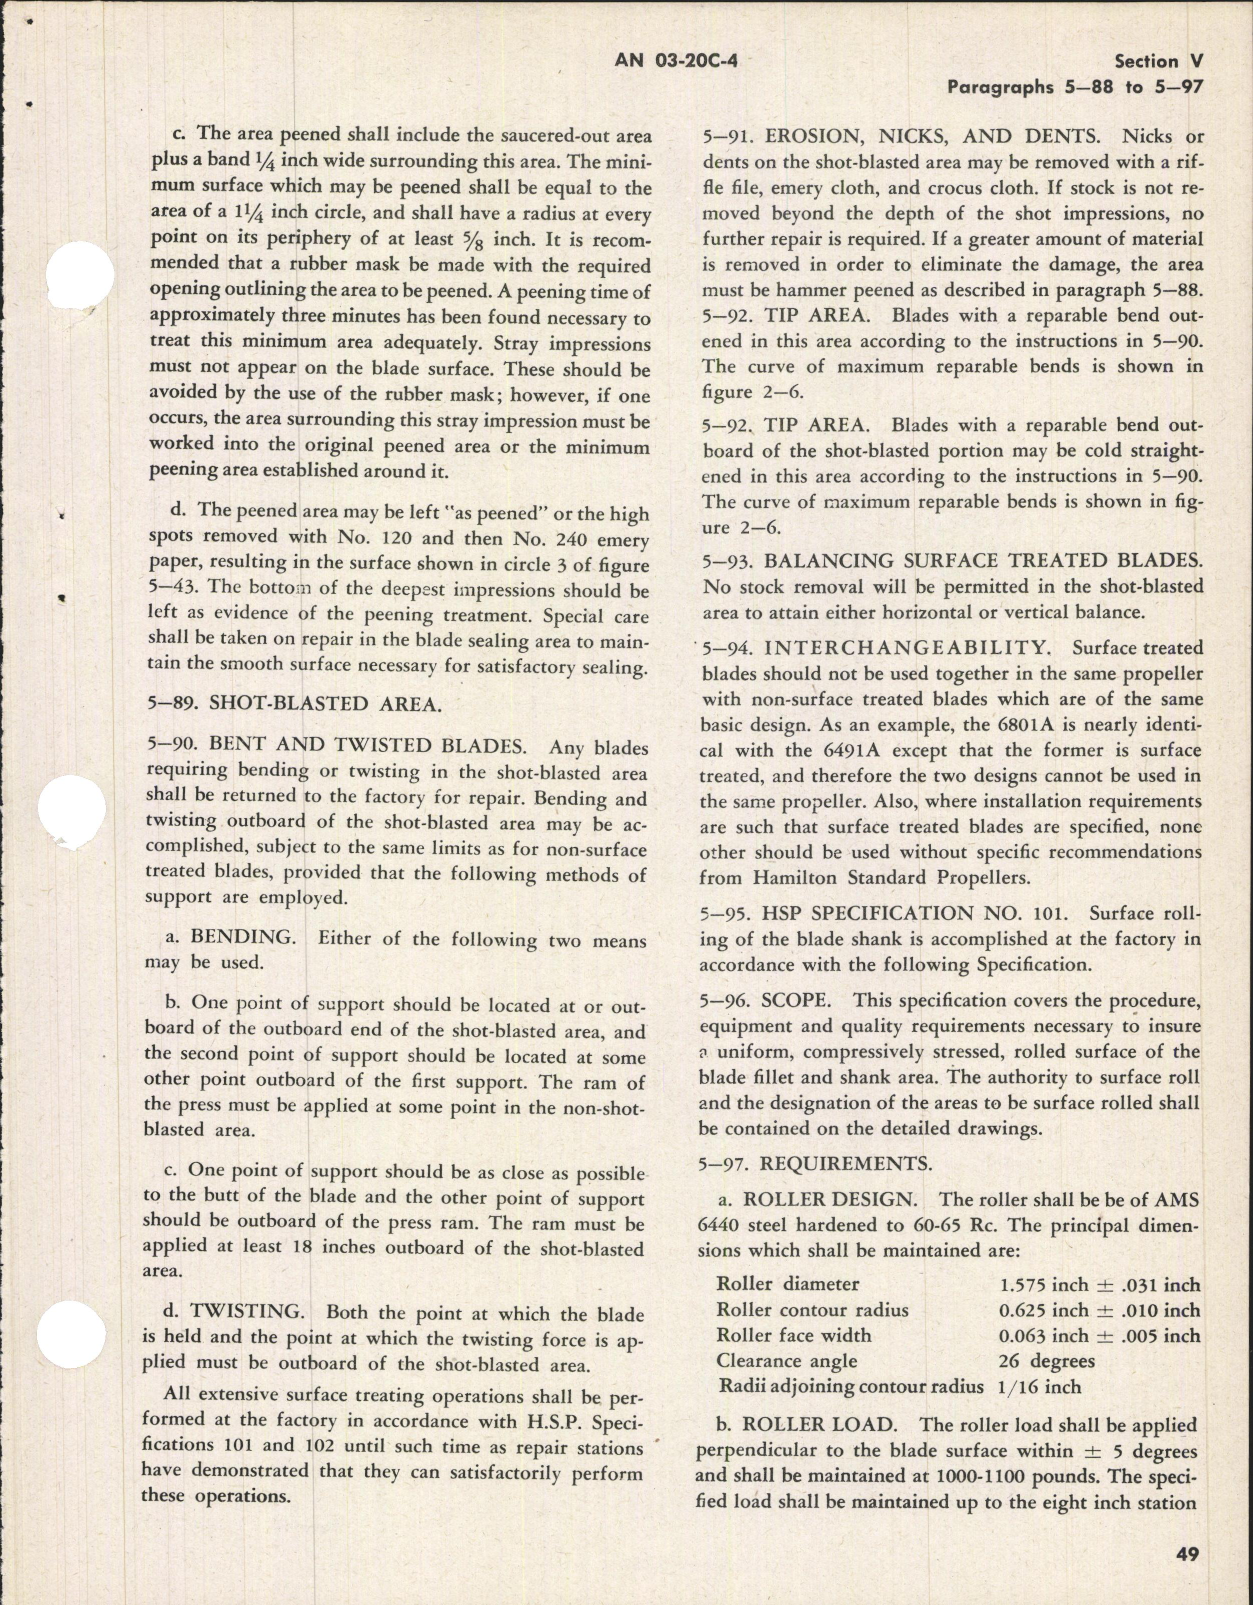 Sample page 5 from AirCorps Library document: Operation, Service, & Overhaul Instructions for Aluminum Alloy Propeller Blades